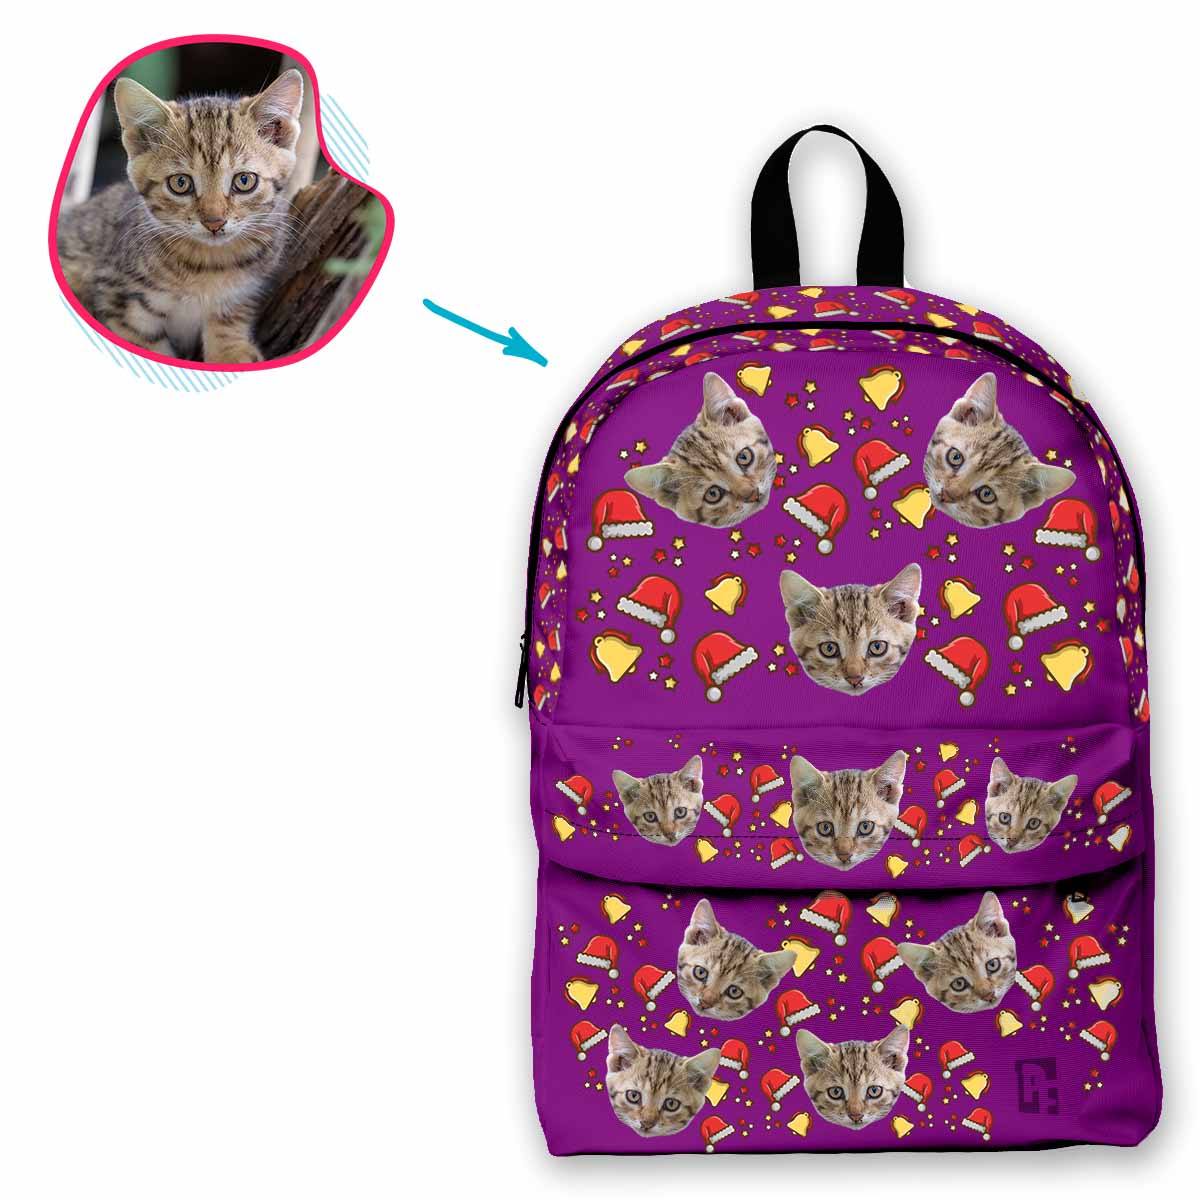 purple Santa's Hat classic backpack personalized with photo of face printed on it